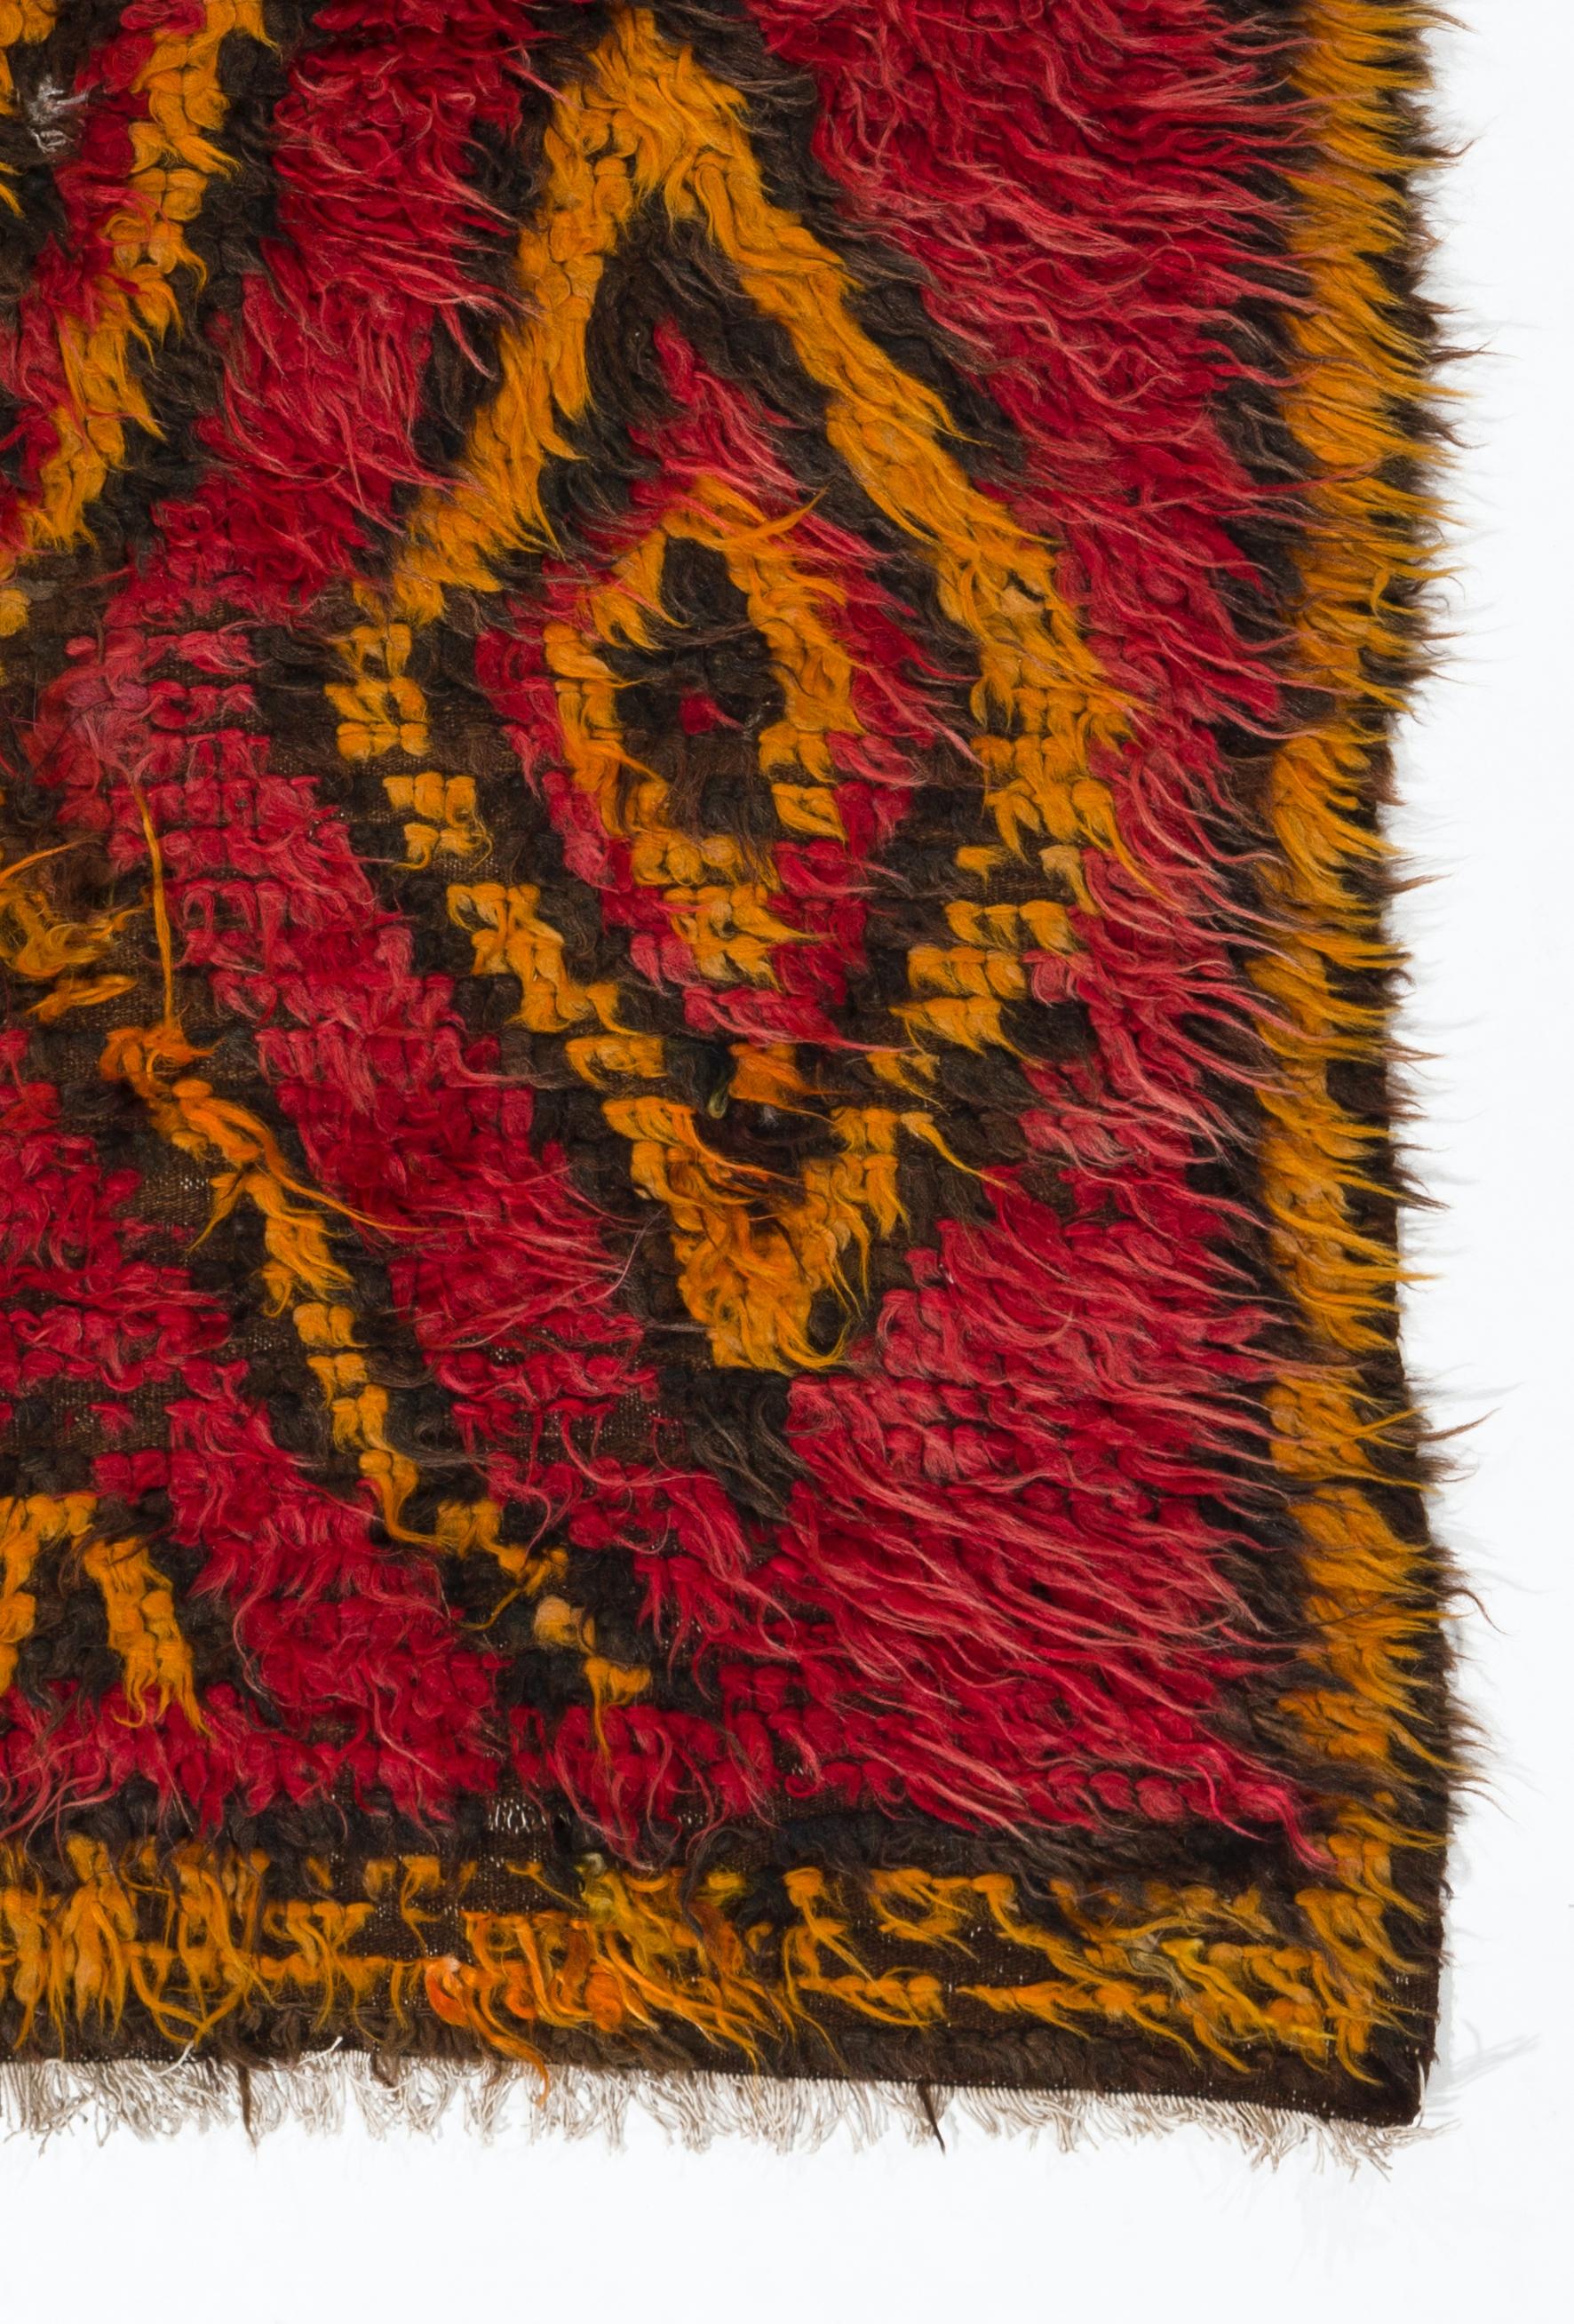 3.8x5.5 Ft Funky One-of-a-Kind Vintage Tulu Rug in Red, Orange, Brown, 100% Wool In Good Condition For Sale In Philadelphia, PA